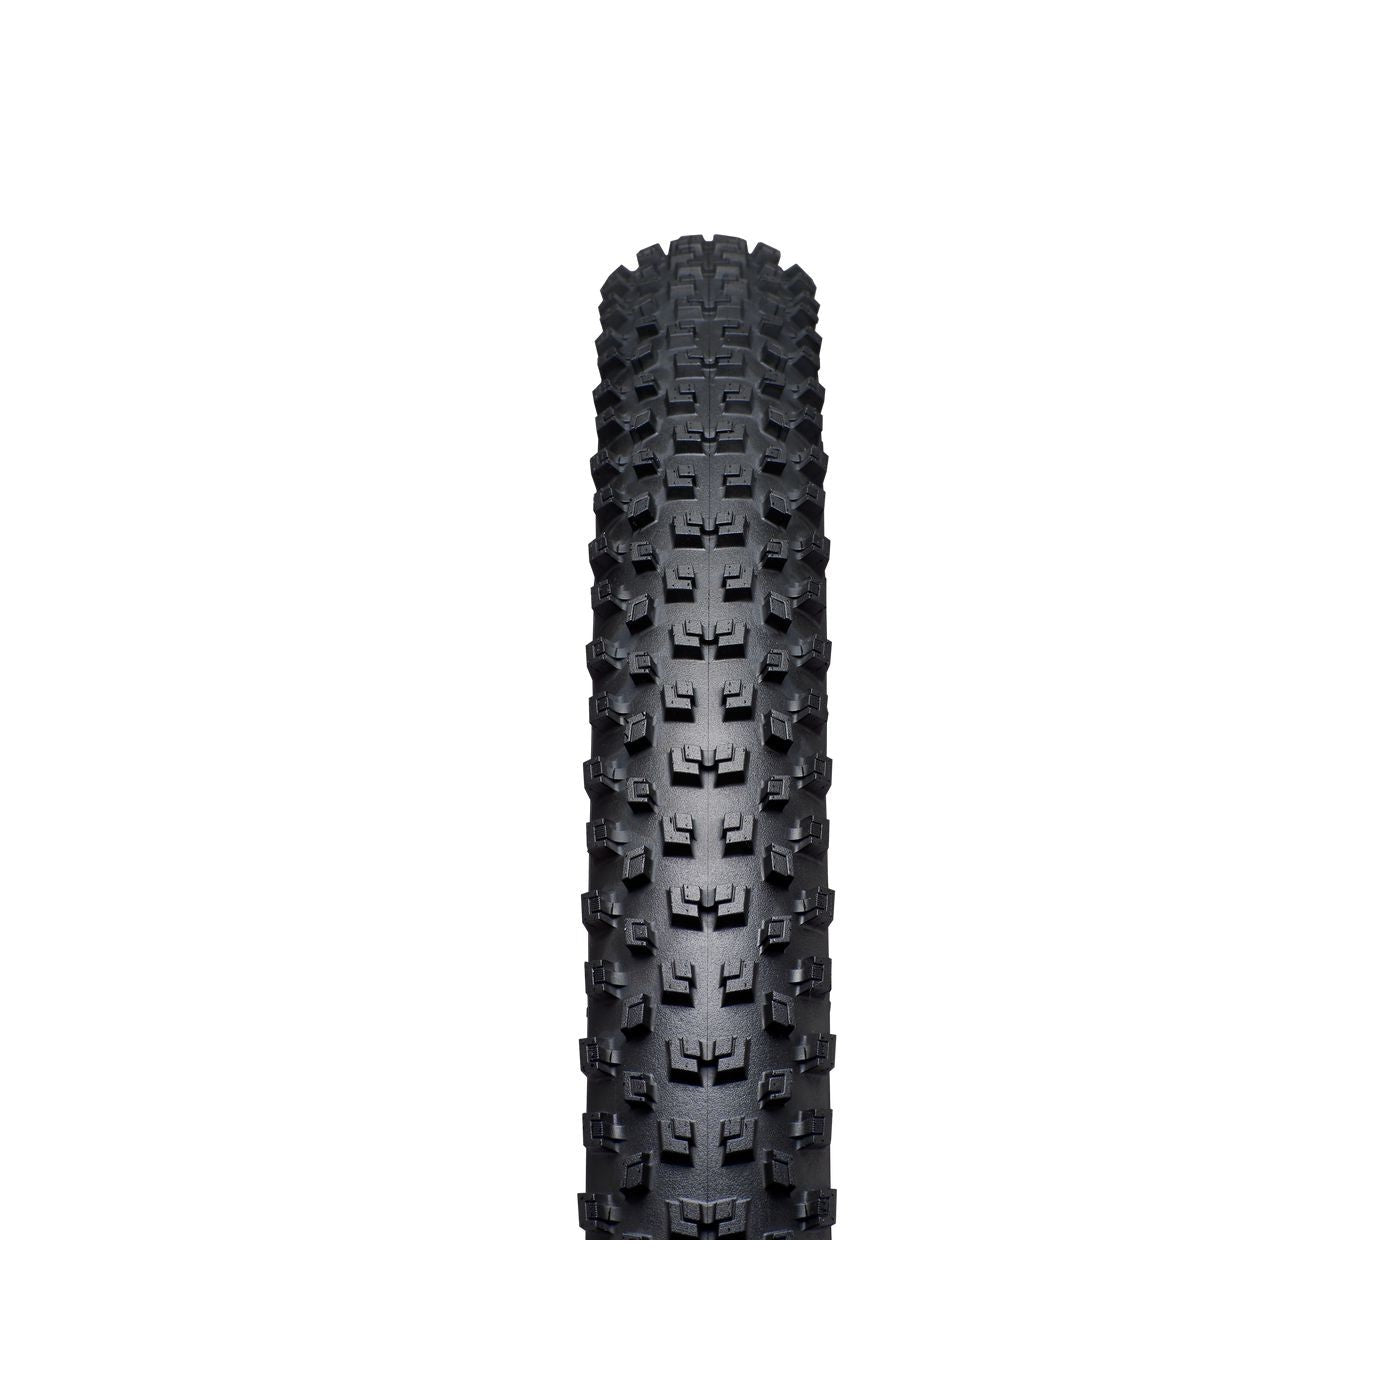 Specialized Ground Control Control 2Bliss Ready T5 27.5" Bike Tire - Tires - Bicycle Warehouse